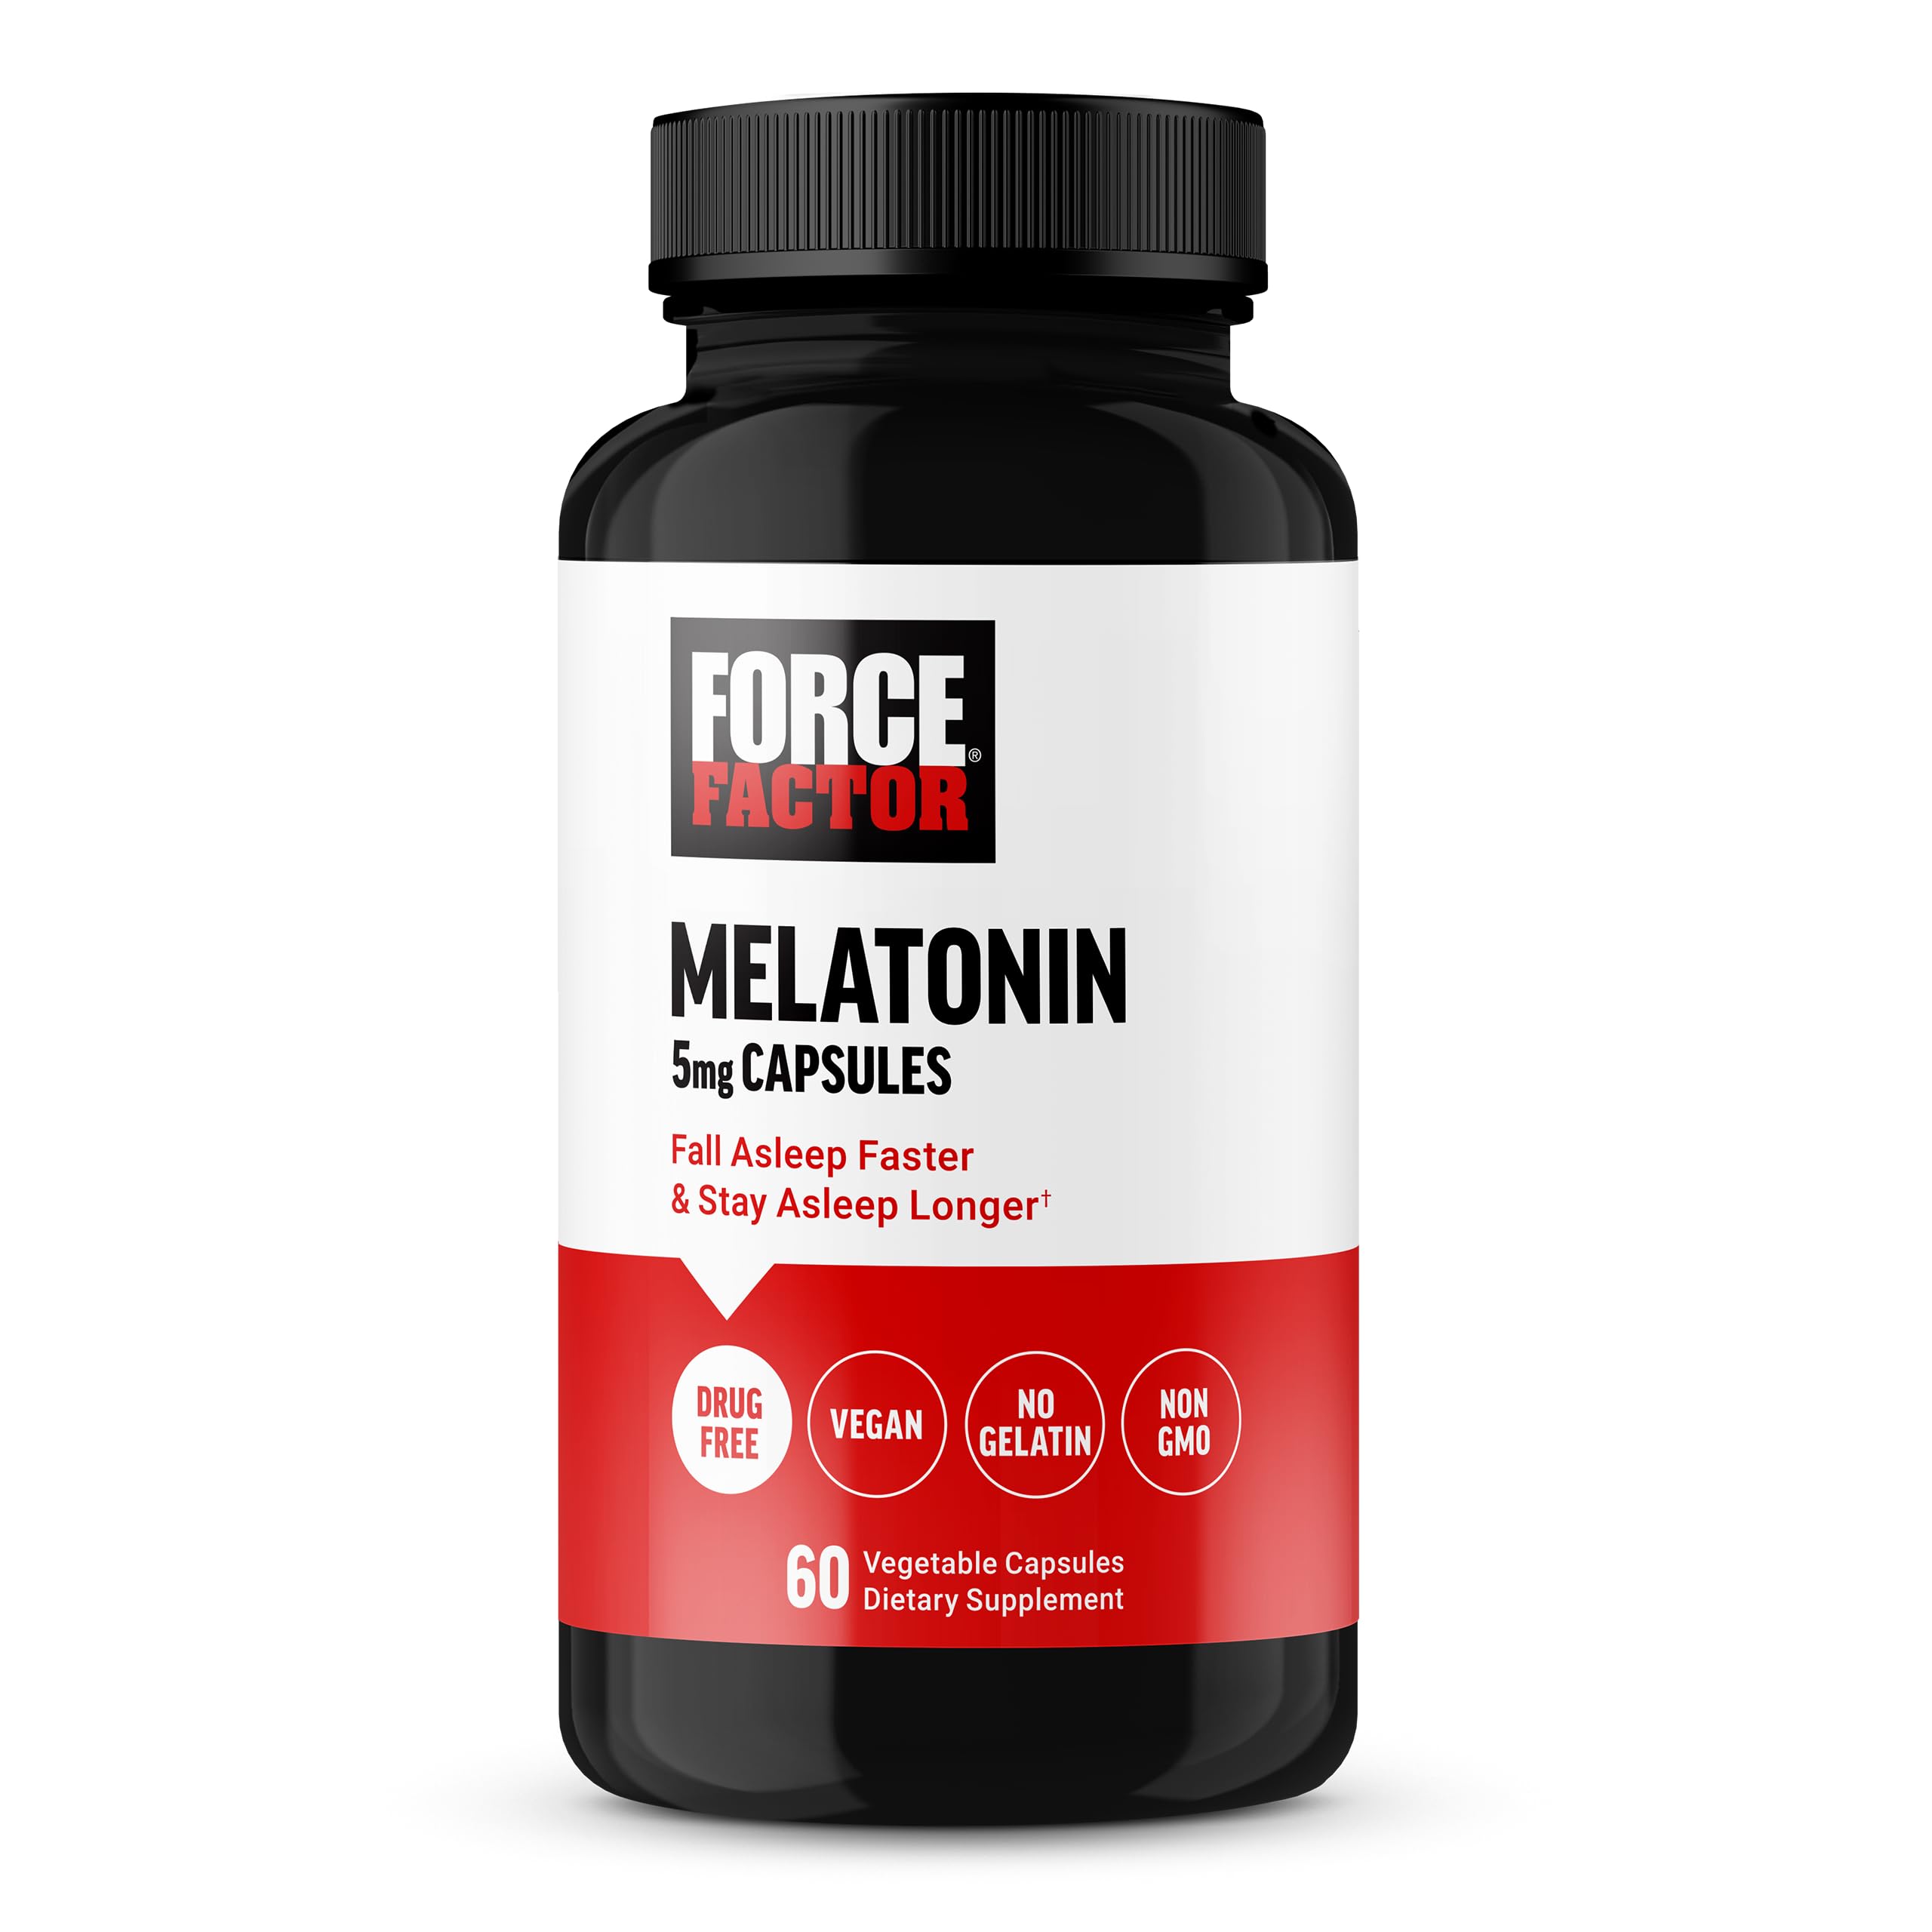 60-Count 5mg Force Factor Melatonin Vegetable Capsules $2.25 ($0.04 each) w/ S&S + Free Shipping w/ Prime or on $35+